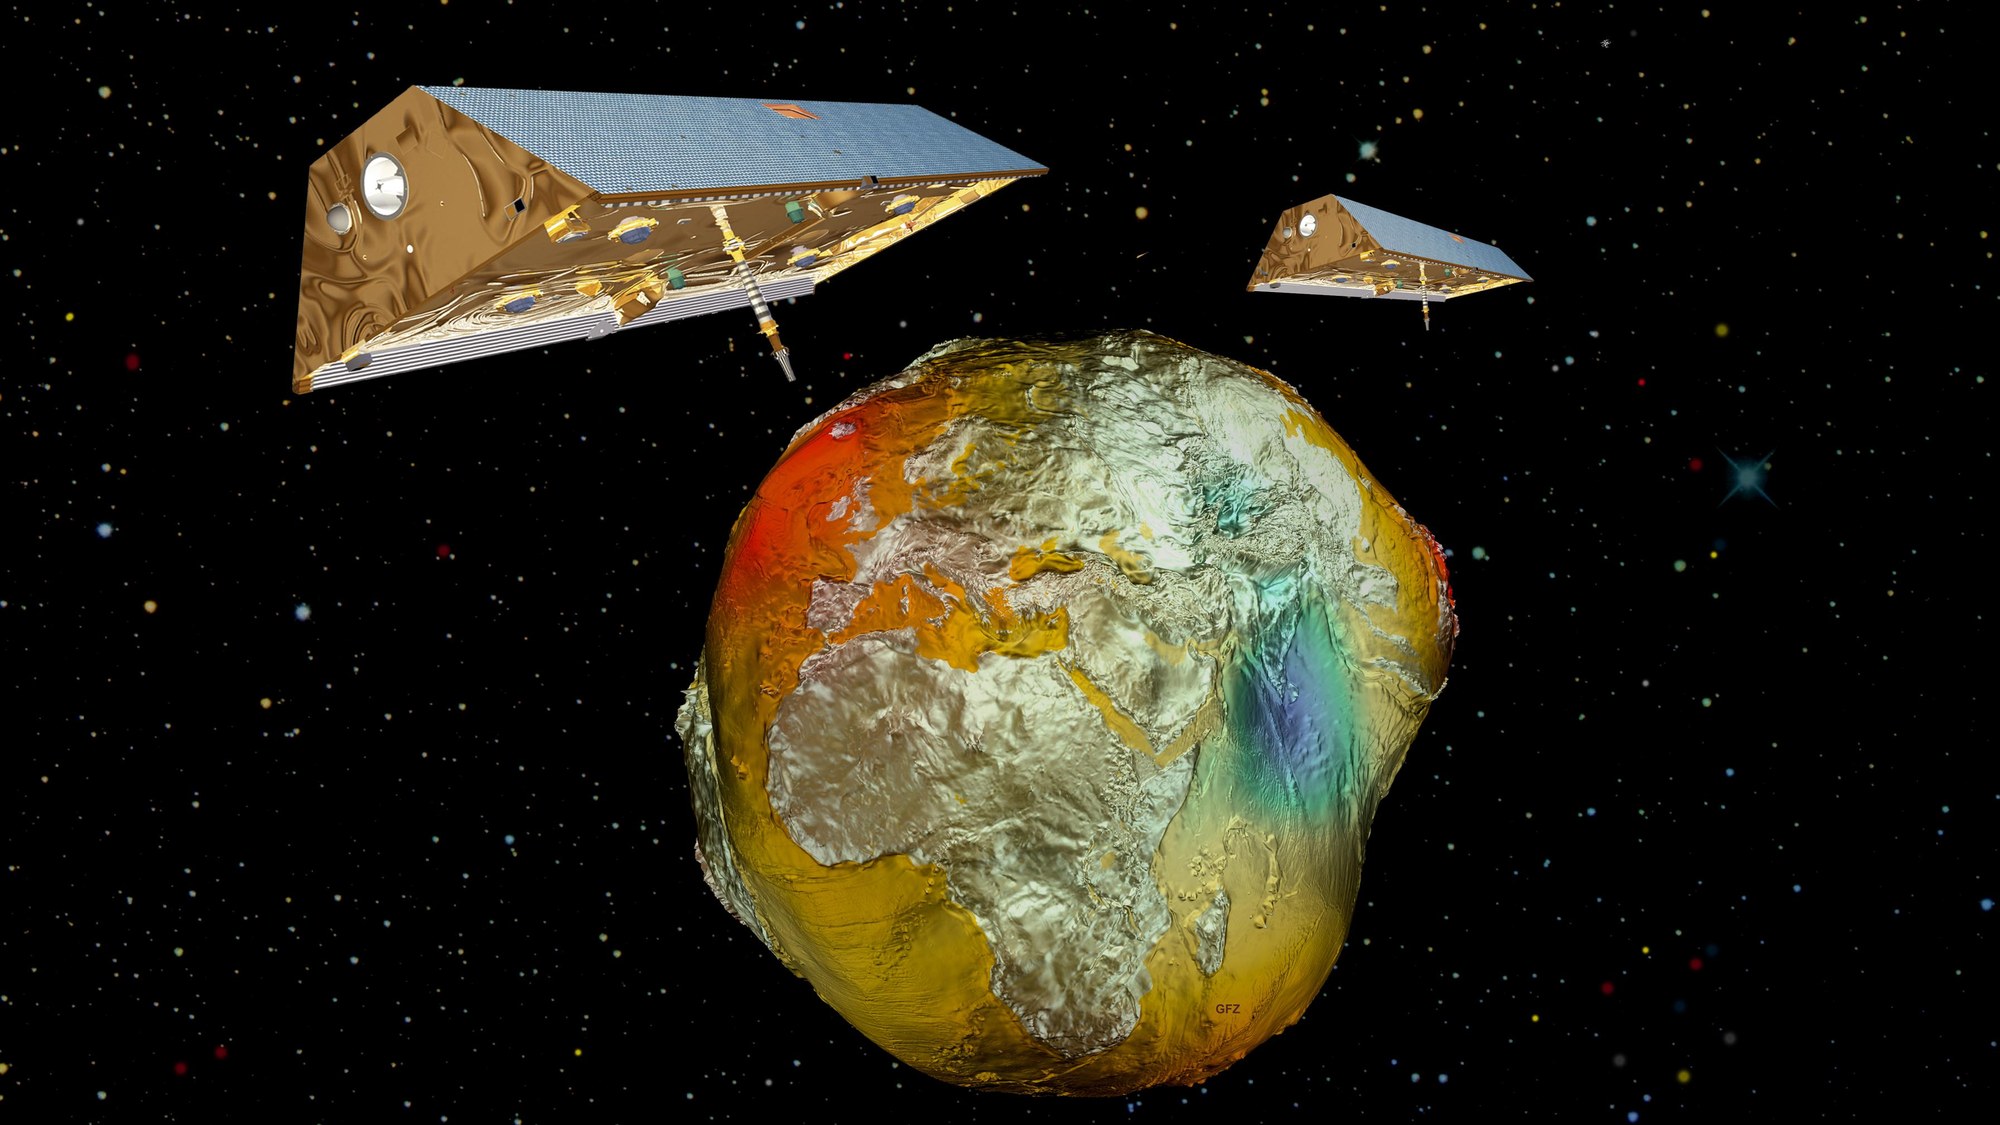 Artist impression of the GRACE satellites and Earth